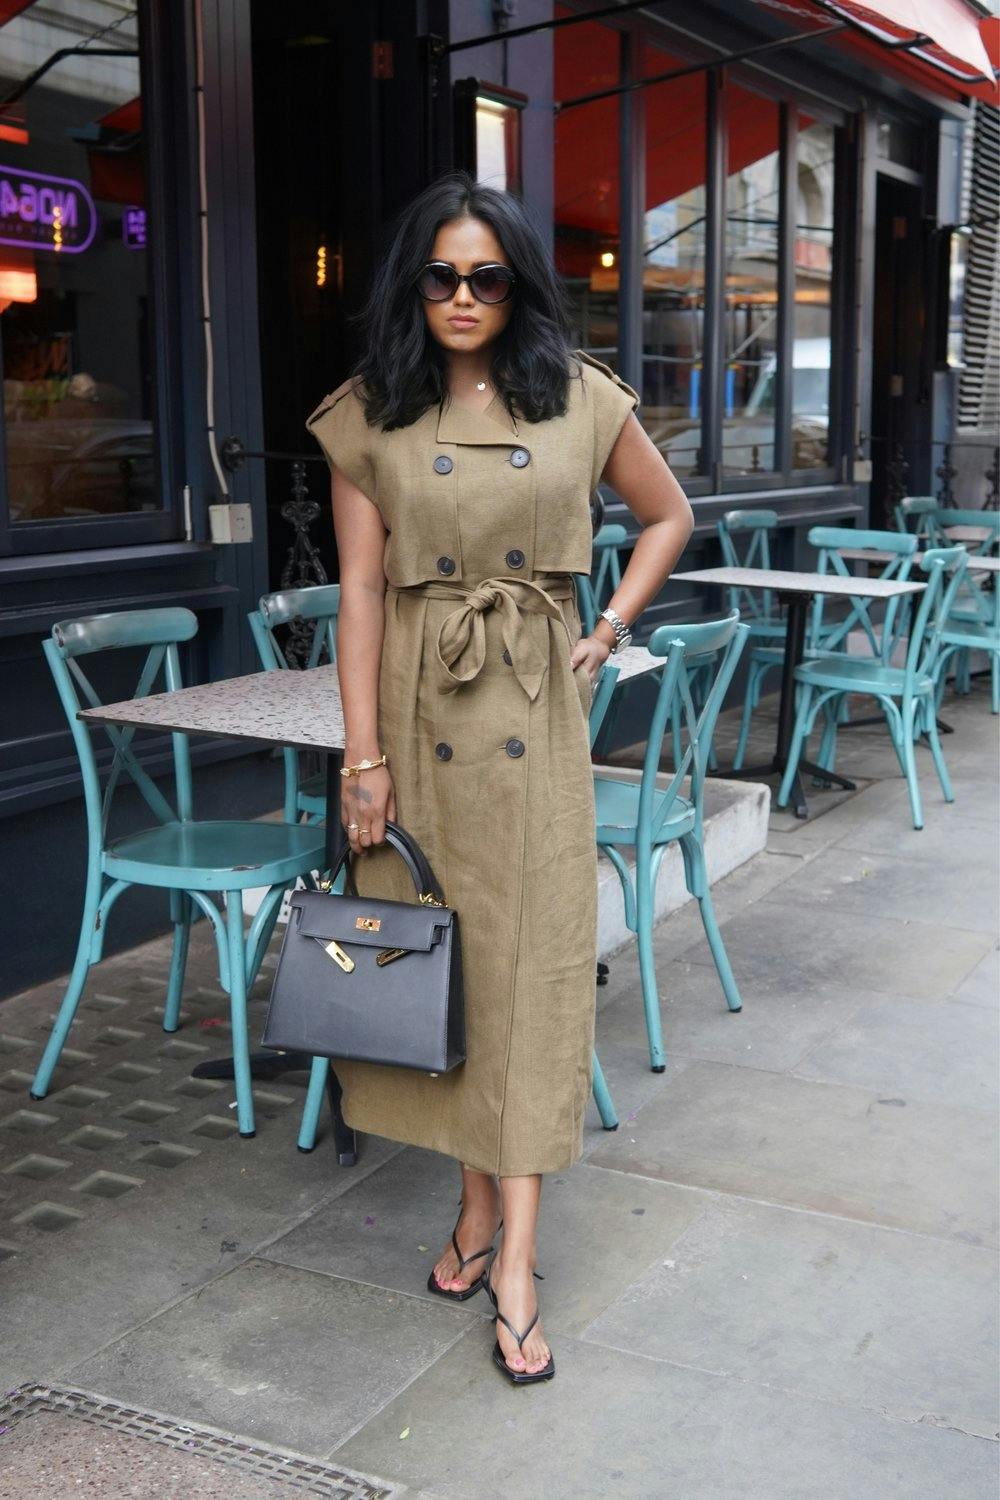 Sachini wearing a Massimo Dutti Limited Edition Trench dress in Brown